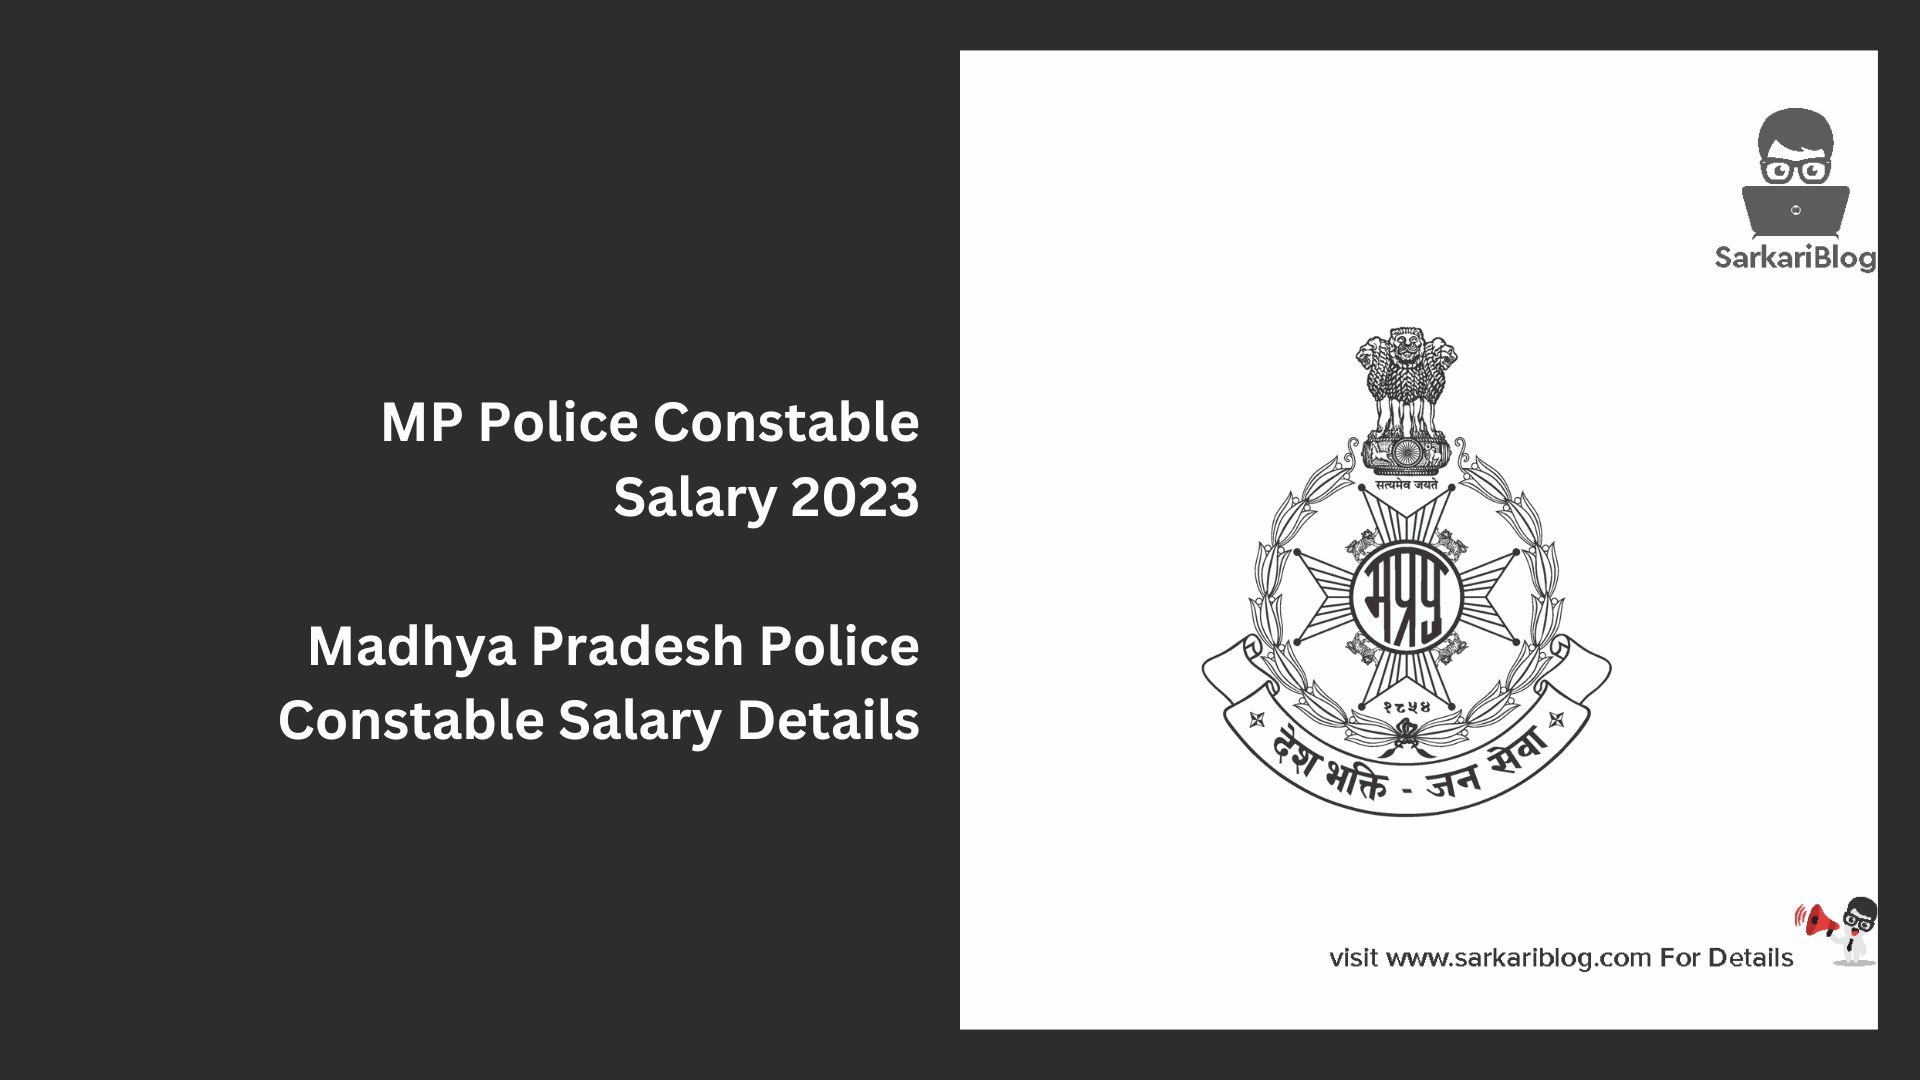 MP Police Constable Salary 2023